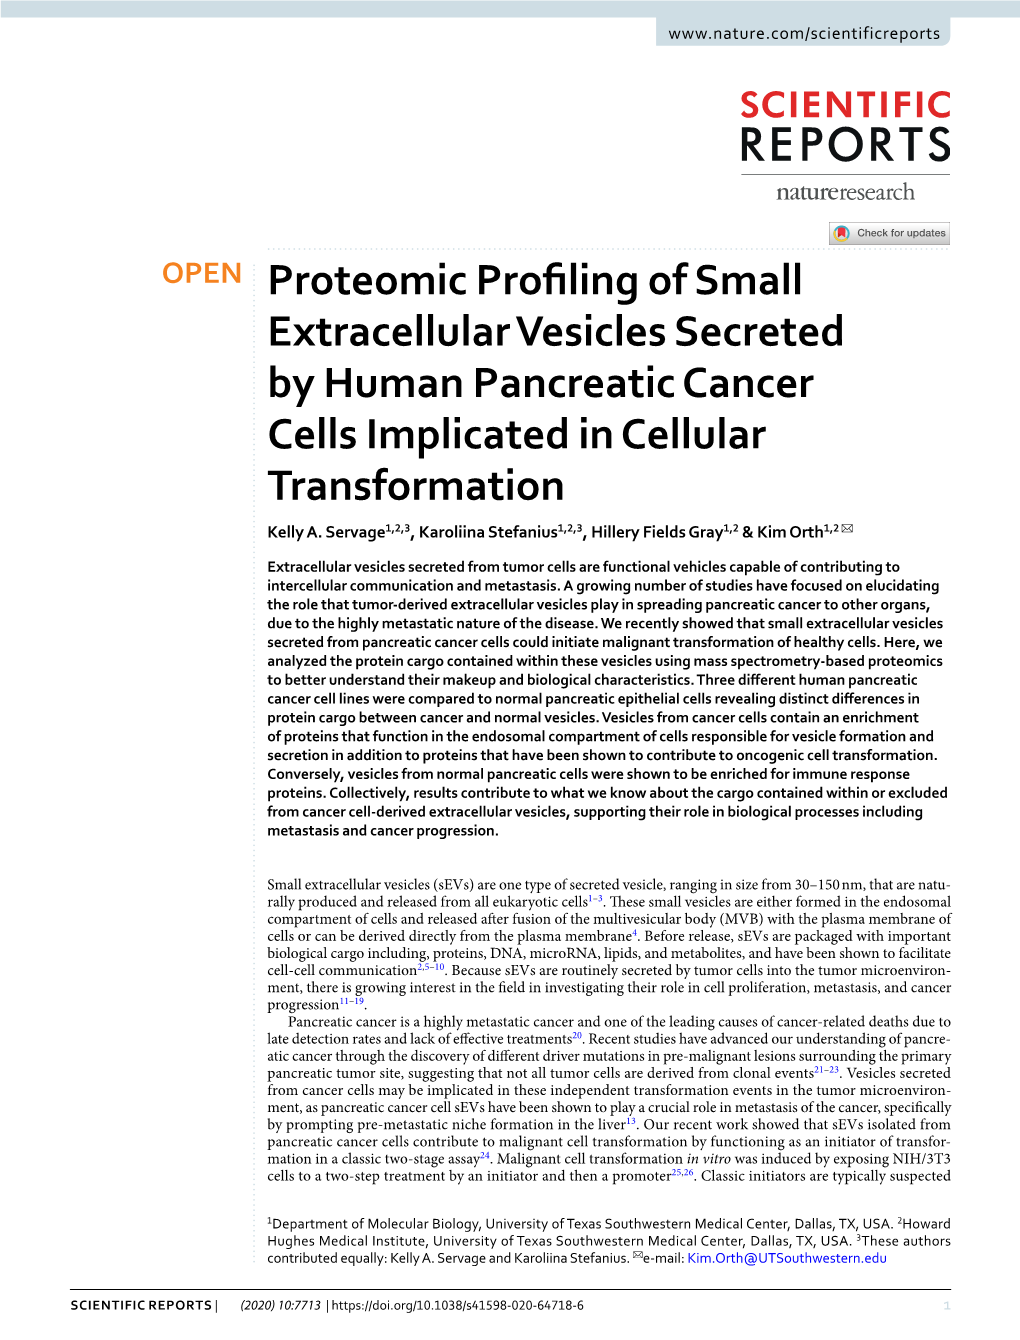 Proteomic Profiling of Small Extracellular Vesicles Secreted By